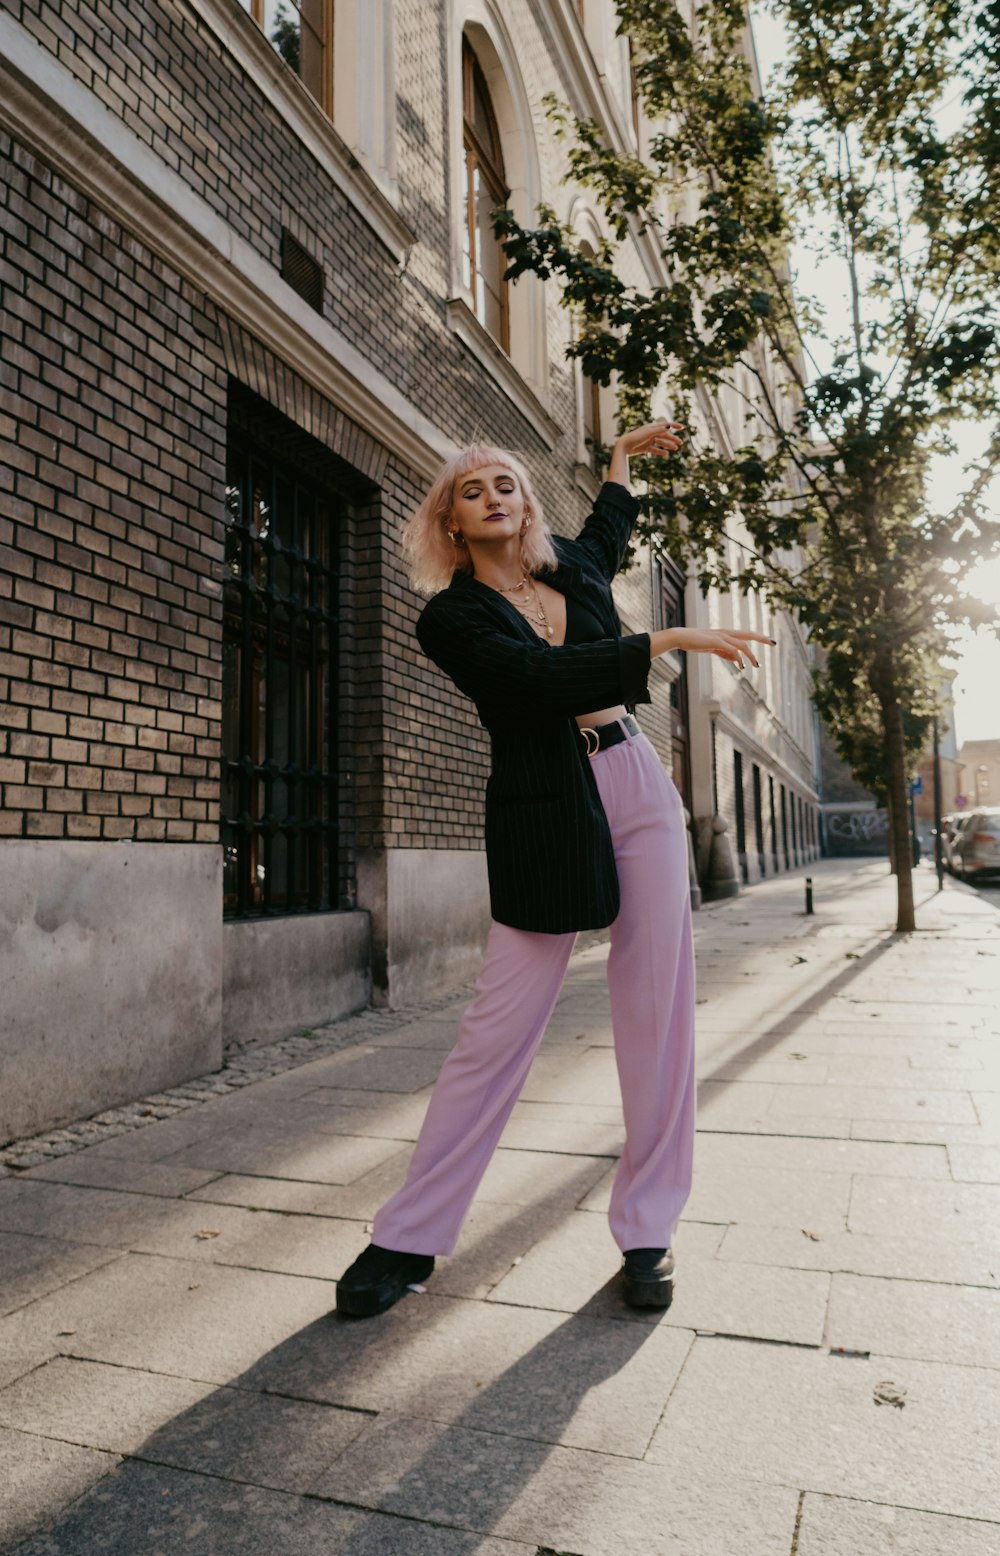 woman in black long sleeve shirt and pink pants standing on sidewalk during daytime